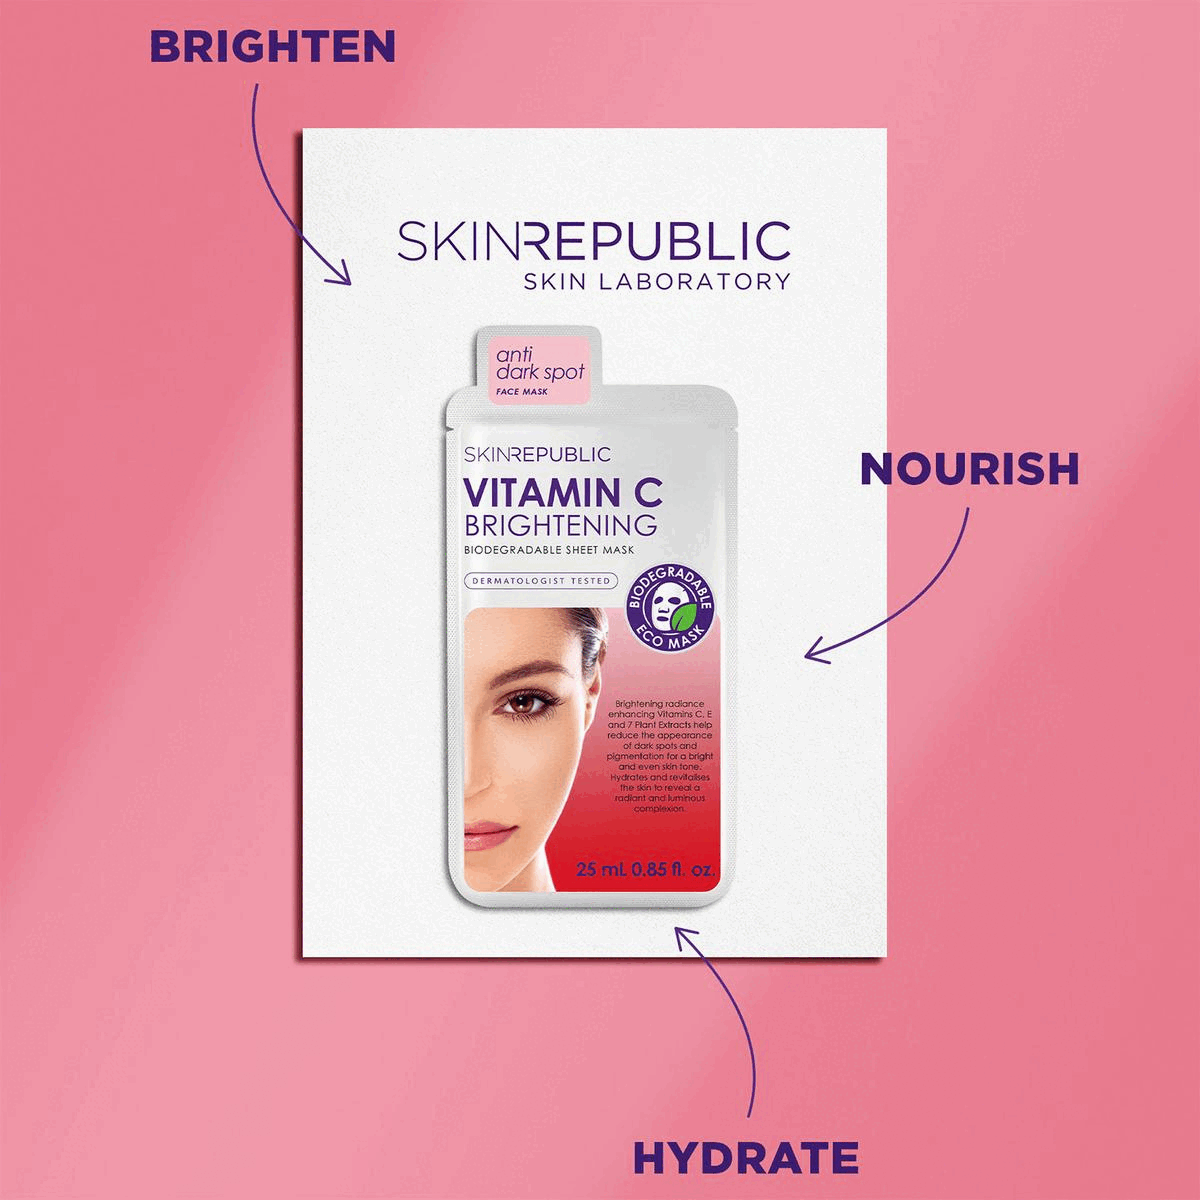 Image 1, brighten, nourish, hydrate Image 2, biodegradable mask and pack, vegetarian friendly